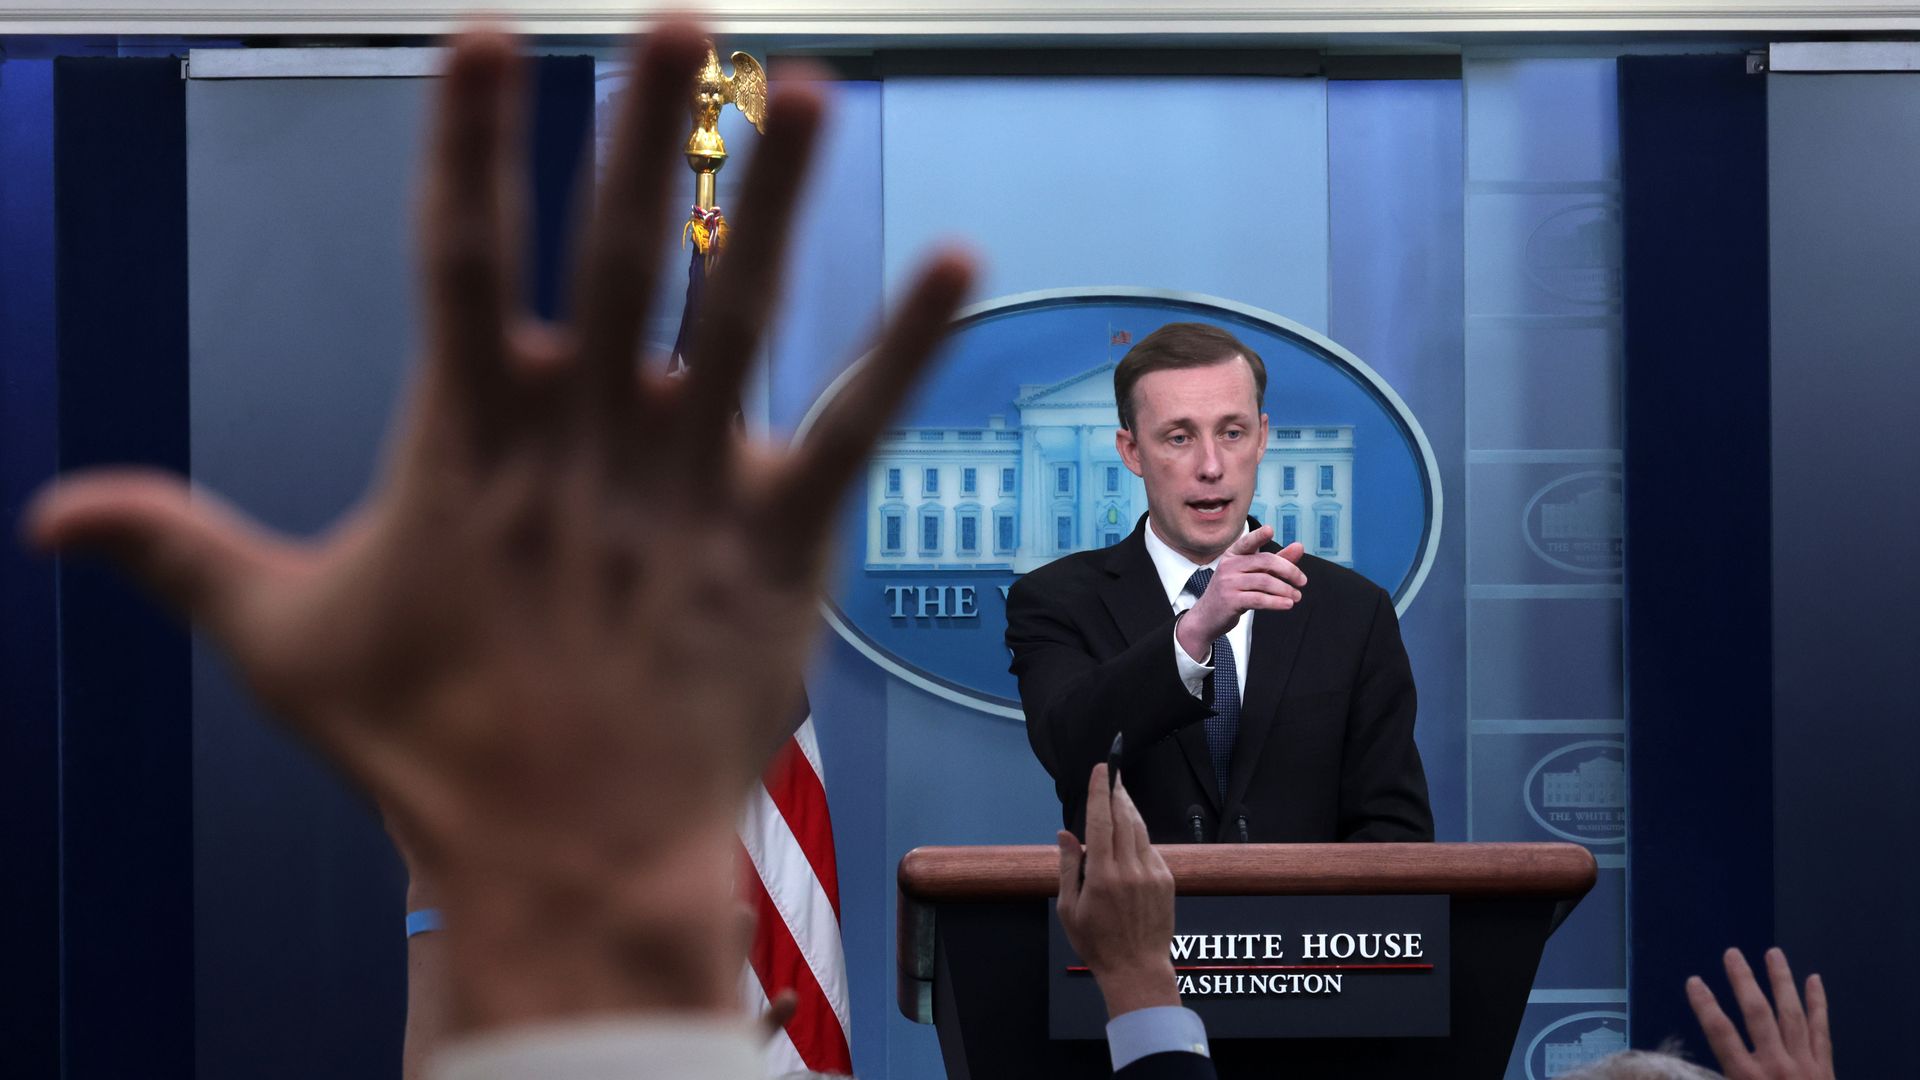 National Security Adviser Jake Sullivan is seen answering questions at the Daily Press Briefing.